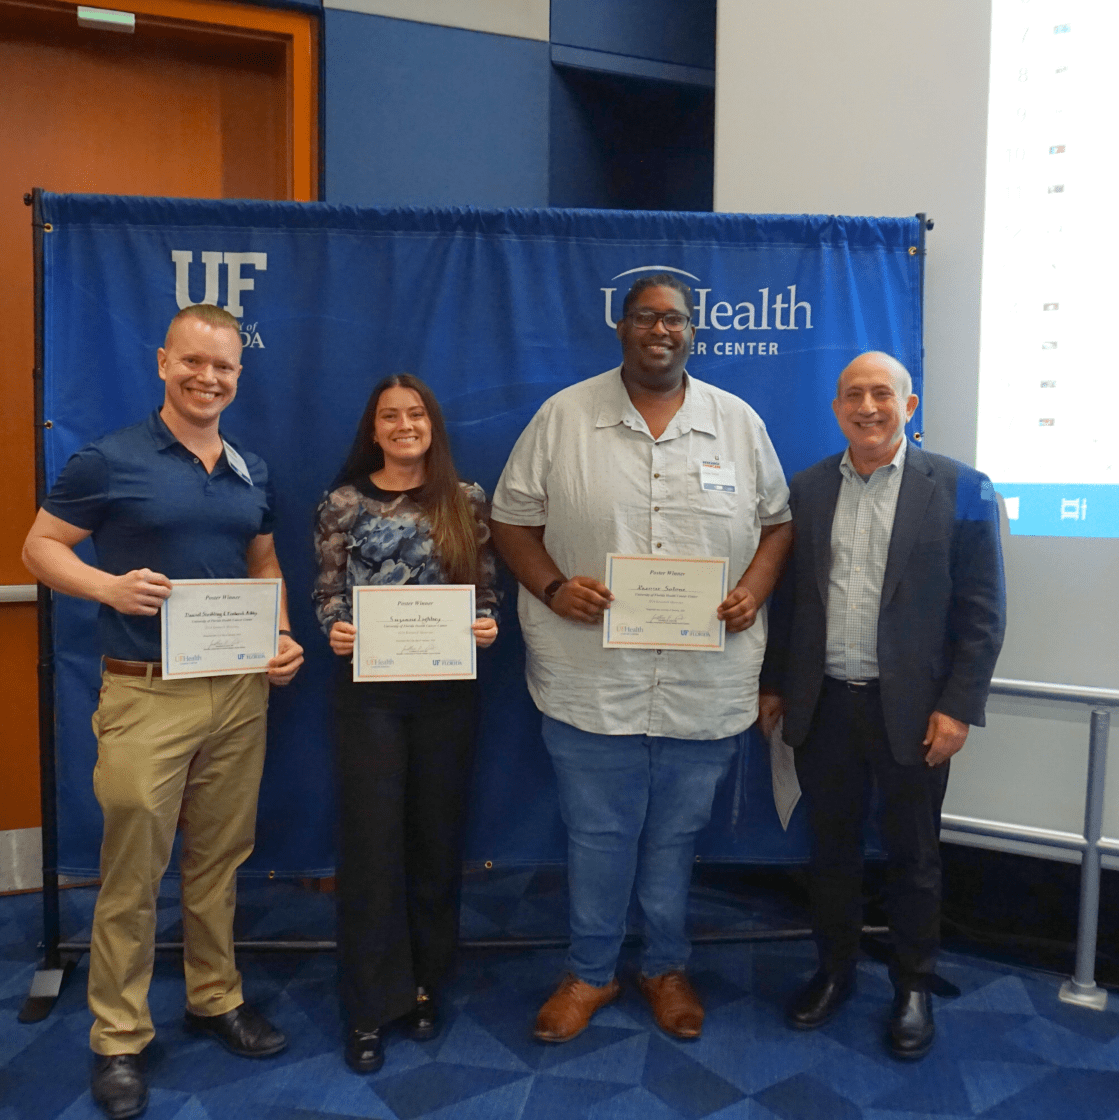 Suzanne is awarded the UFHCC Research Showcase Poster Award